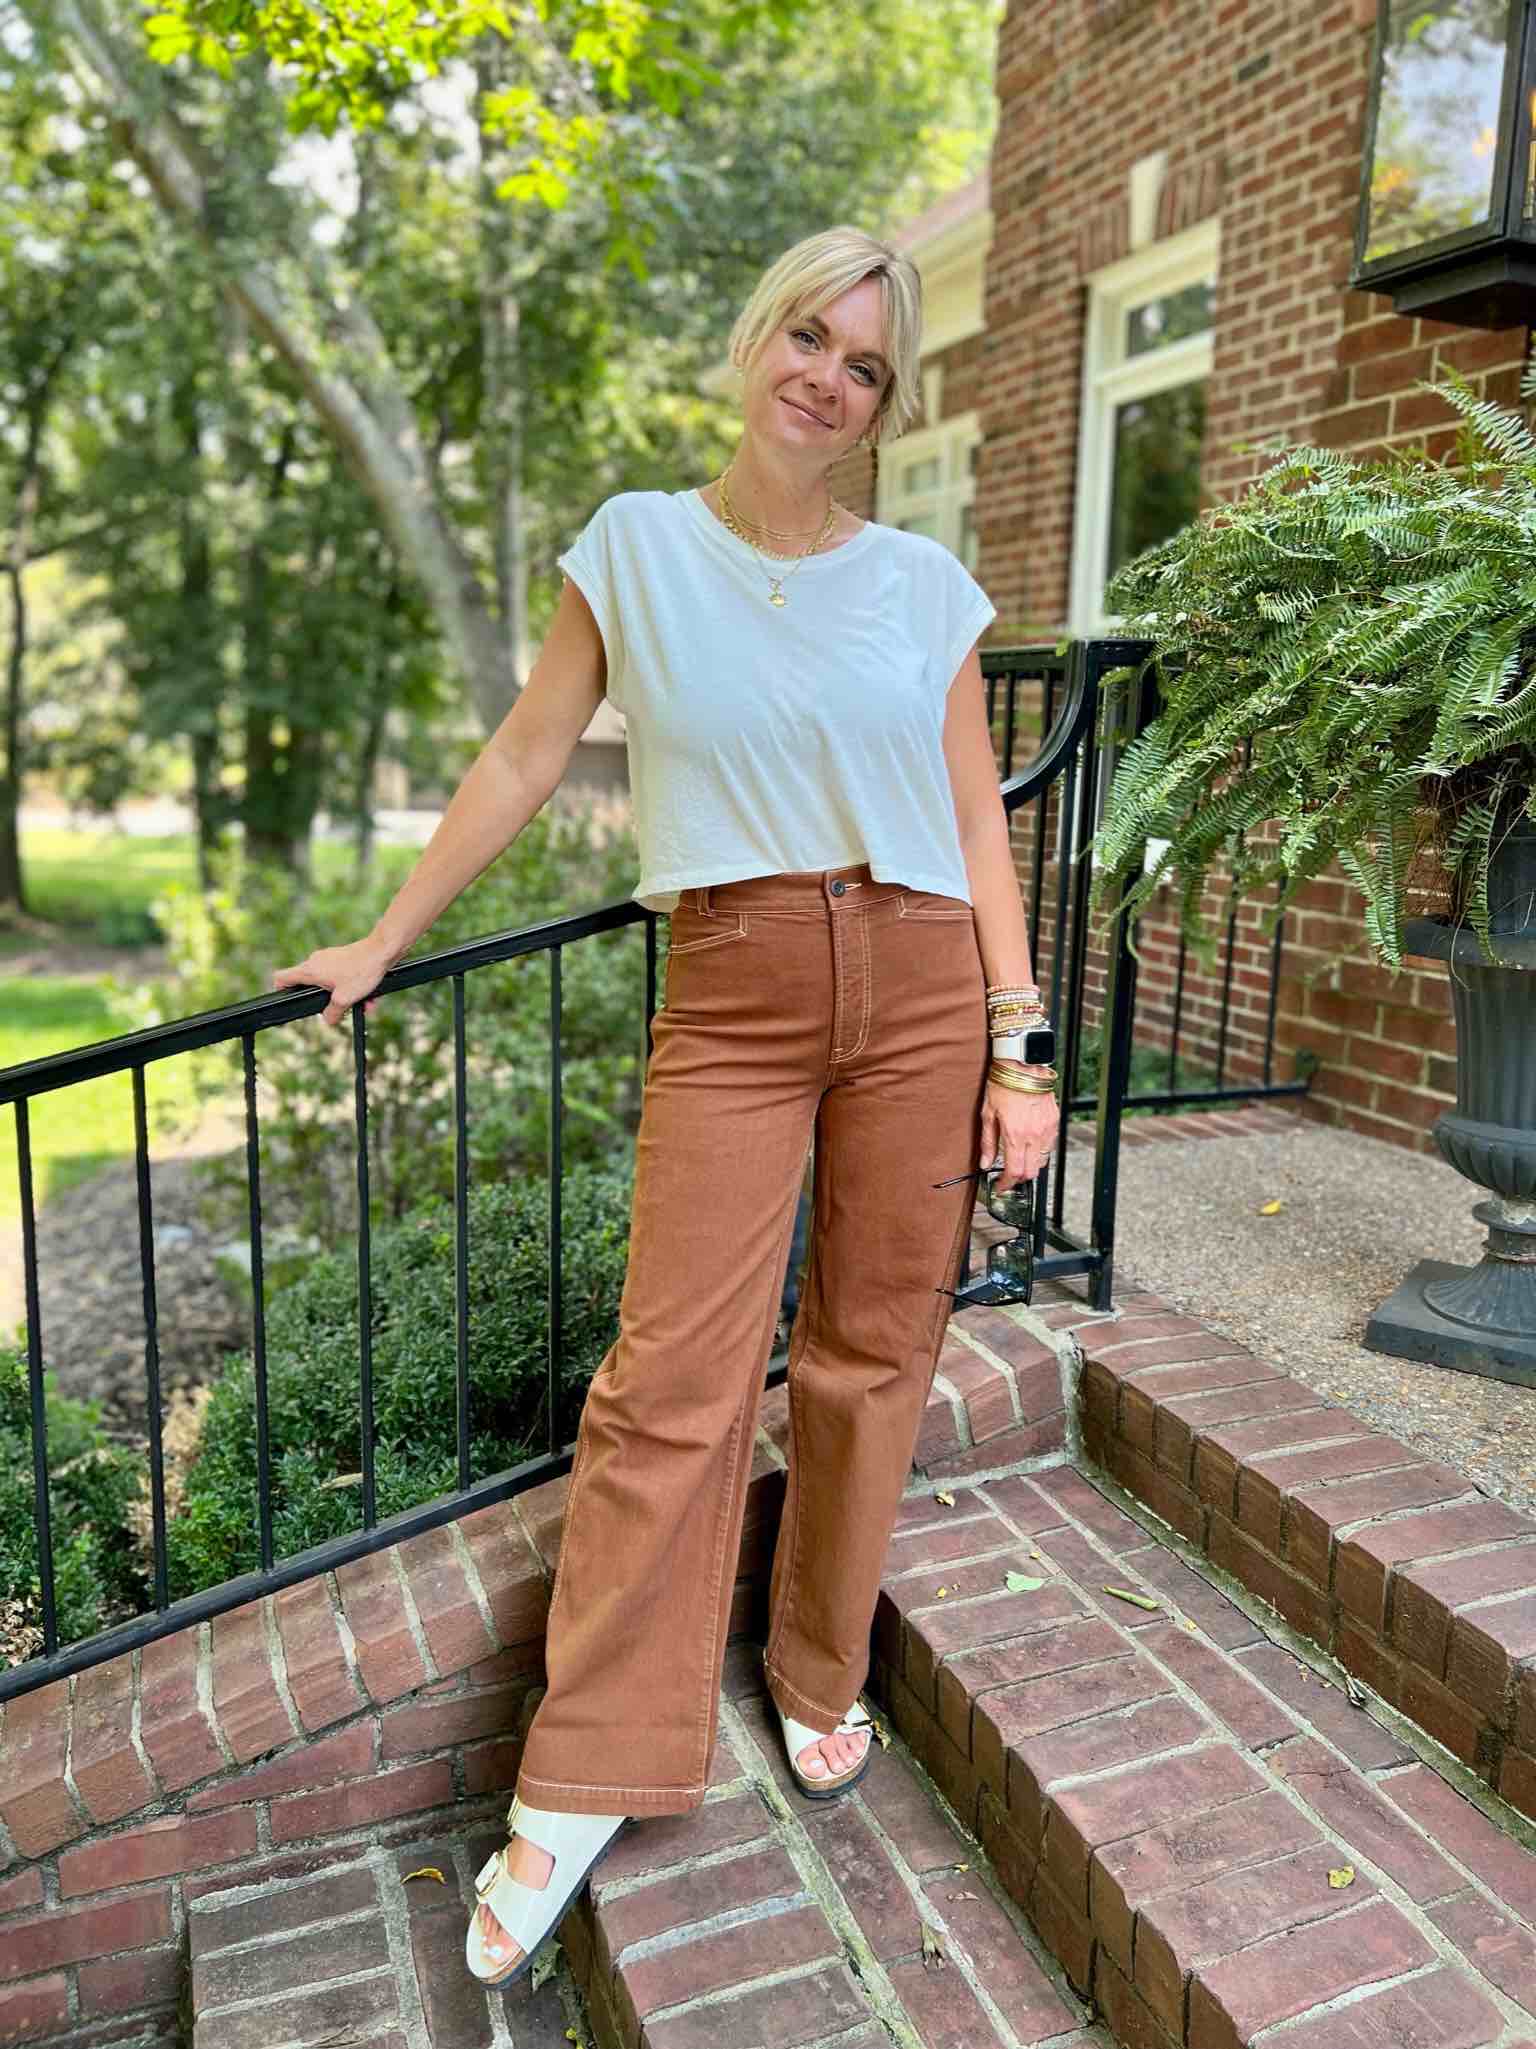 Muscle Tank & Wide Leg Pants how to style wide leg pants how to wear Birkenstocks with pants simple style inspiration nashville stylists share fun styled looks for autumn what to wear in autumn in the southeast how to transition your style to autumn